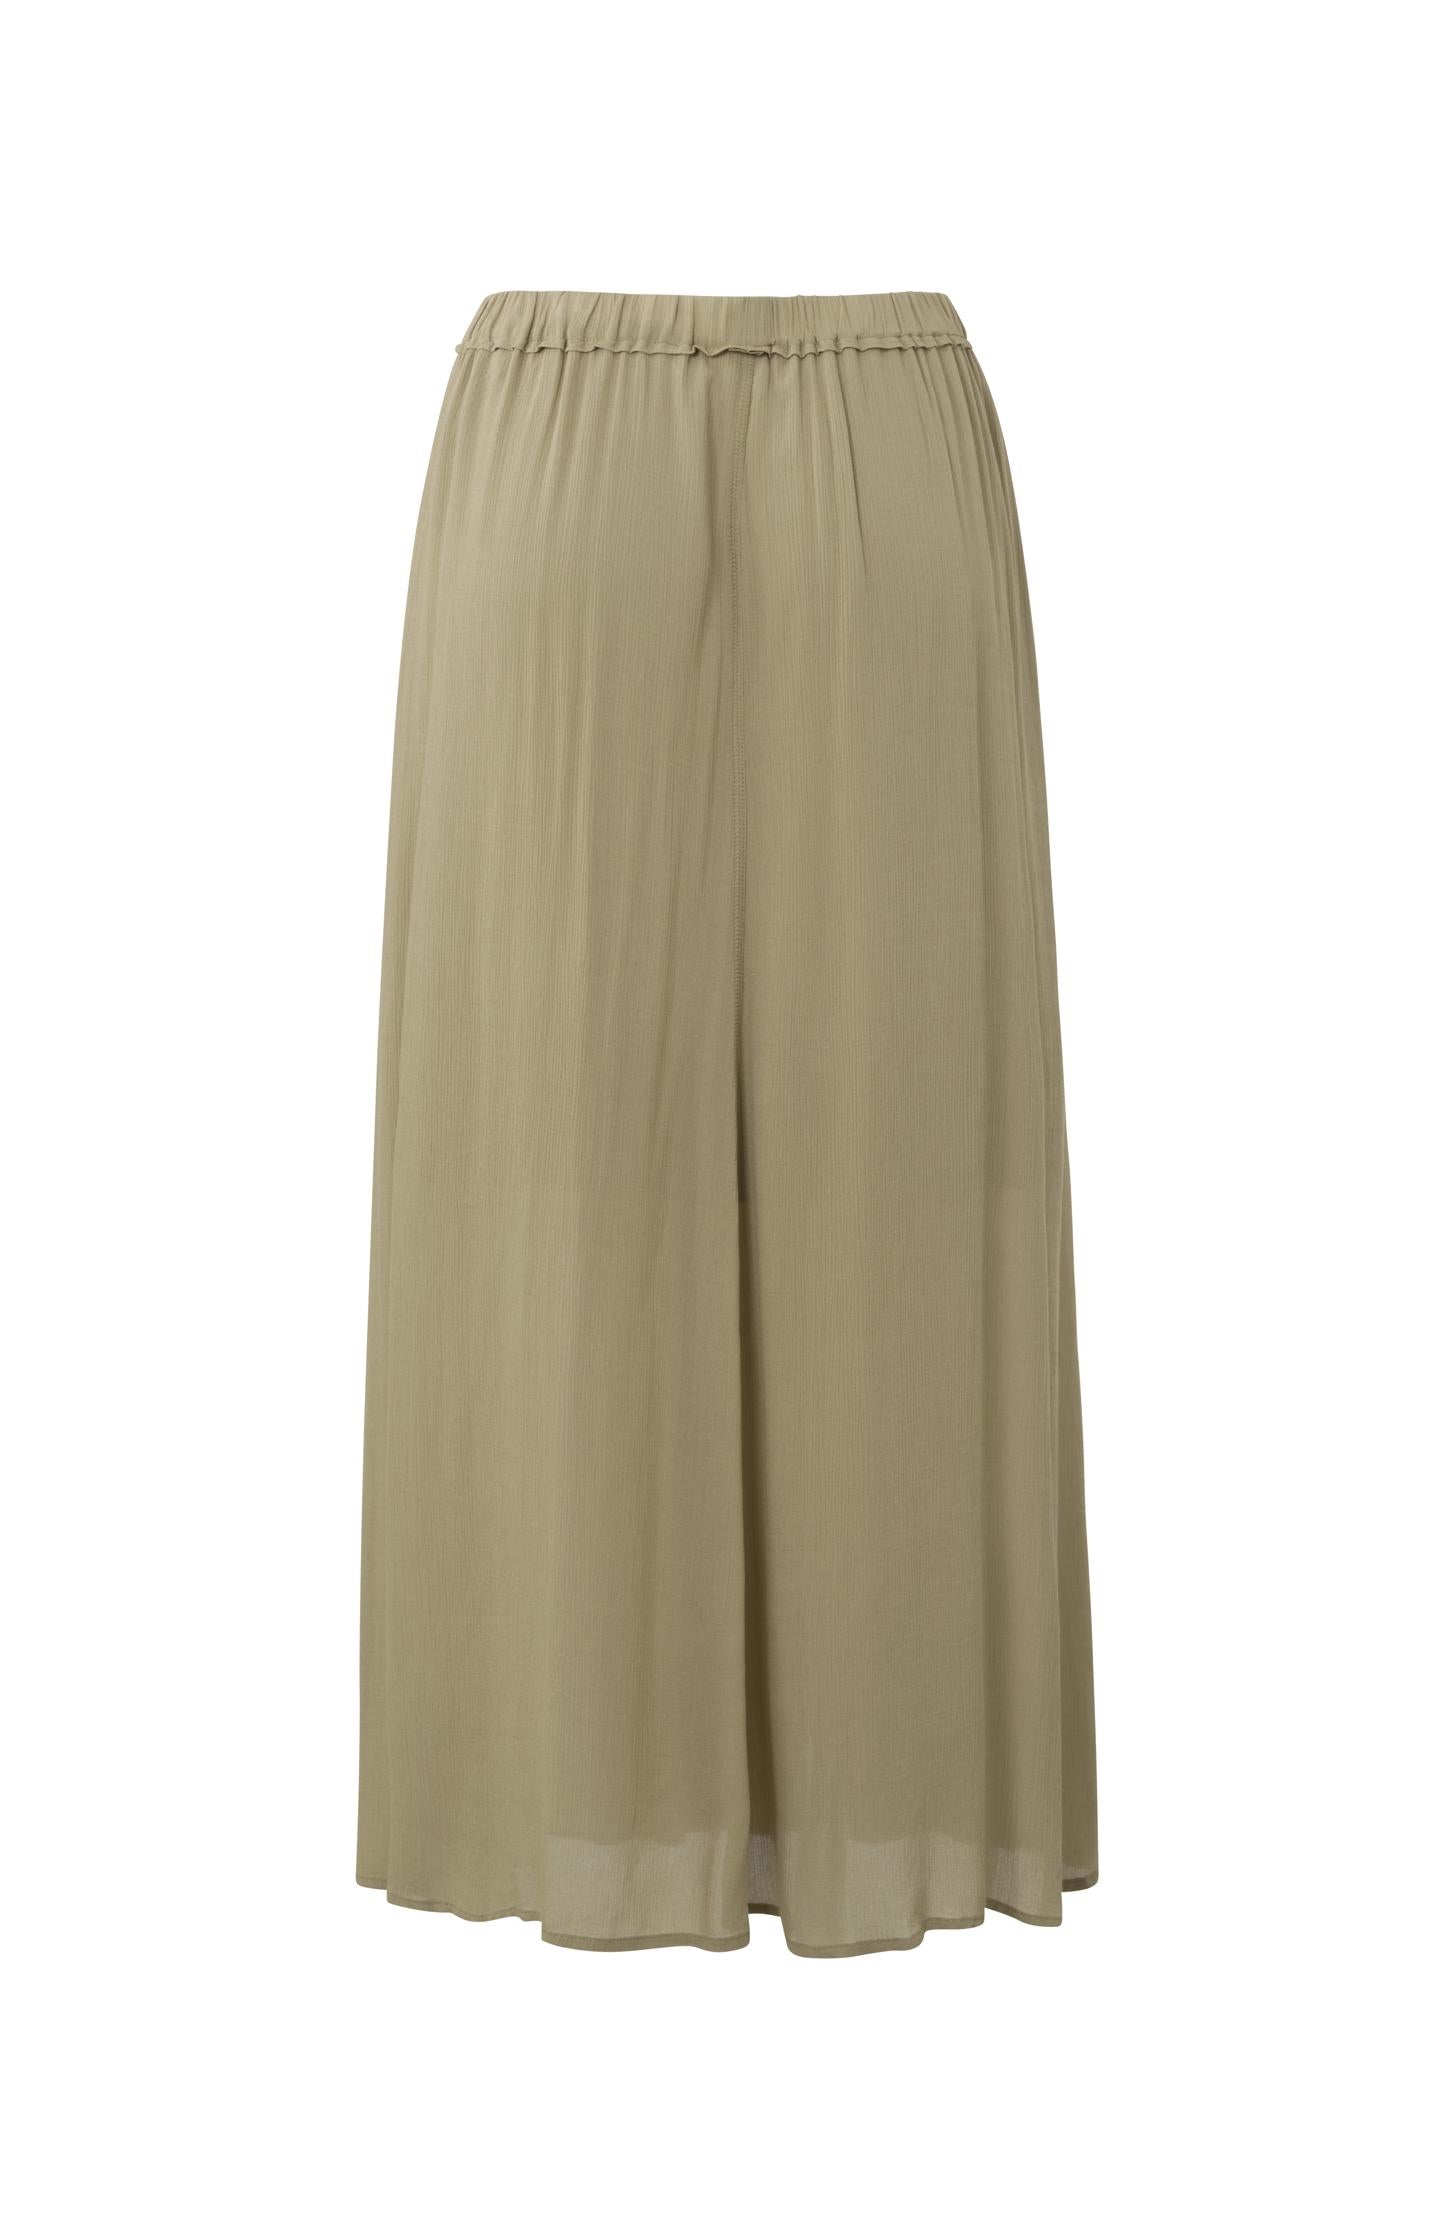 Long A-line skirt with buttons and elastic waist